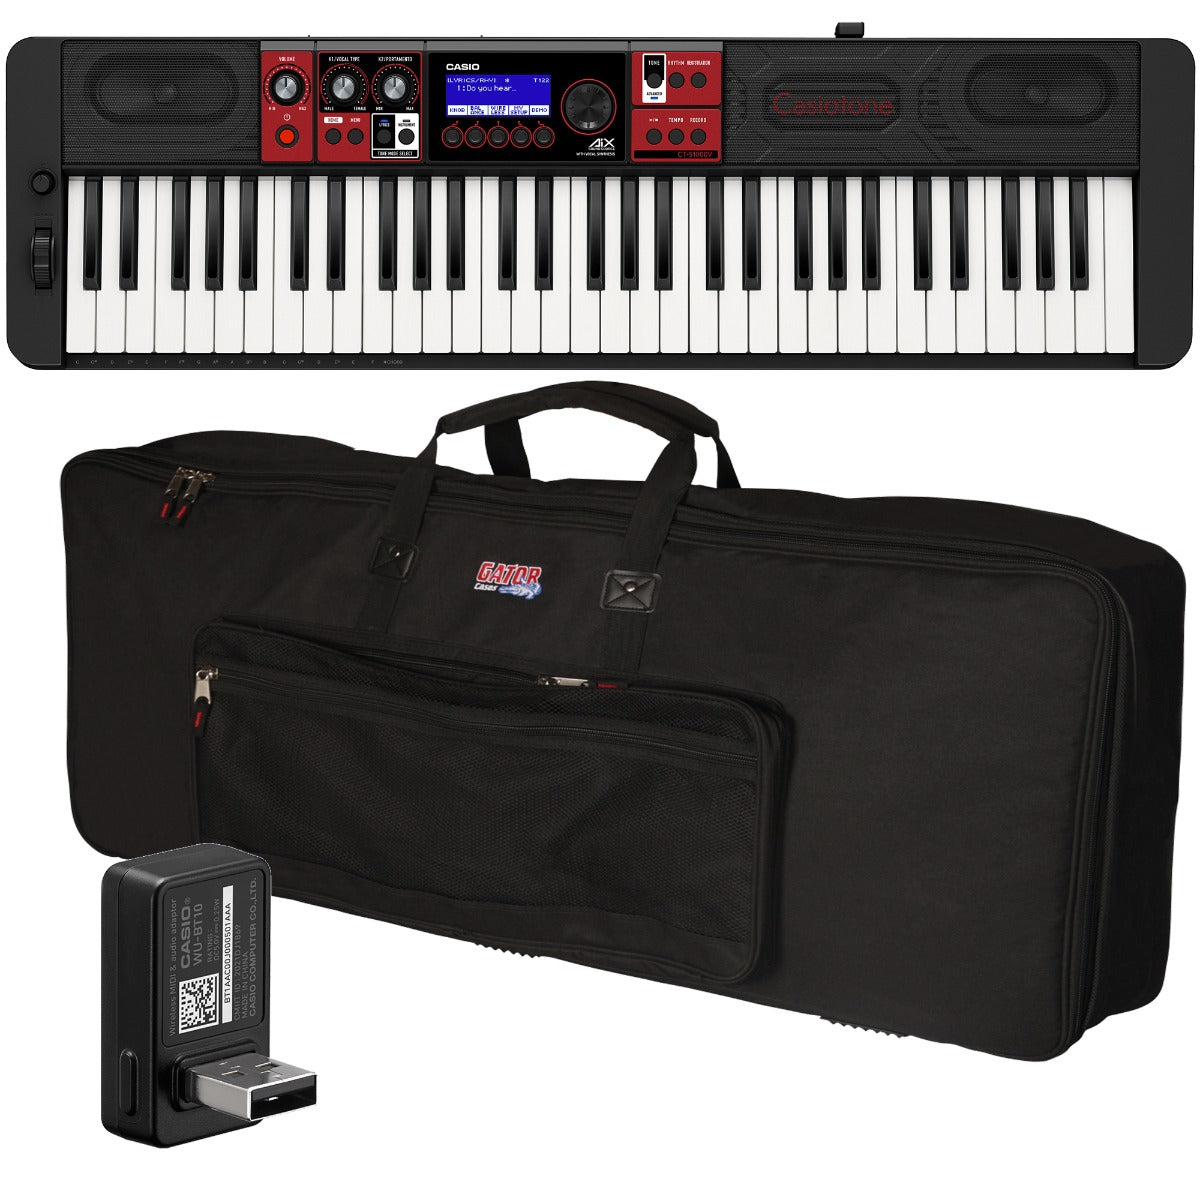 Collage of the components in the Casio Casiotone CT-S1000V Portable Keyboard CARRY BAG KIT bundle